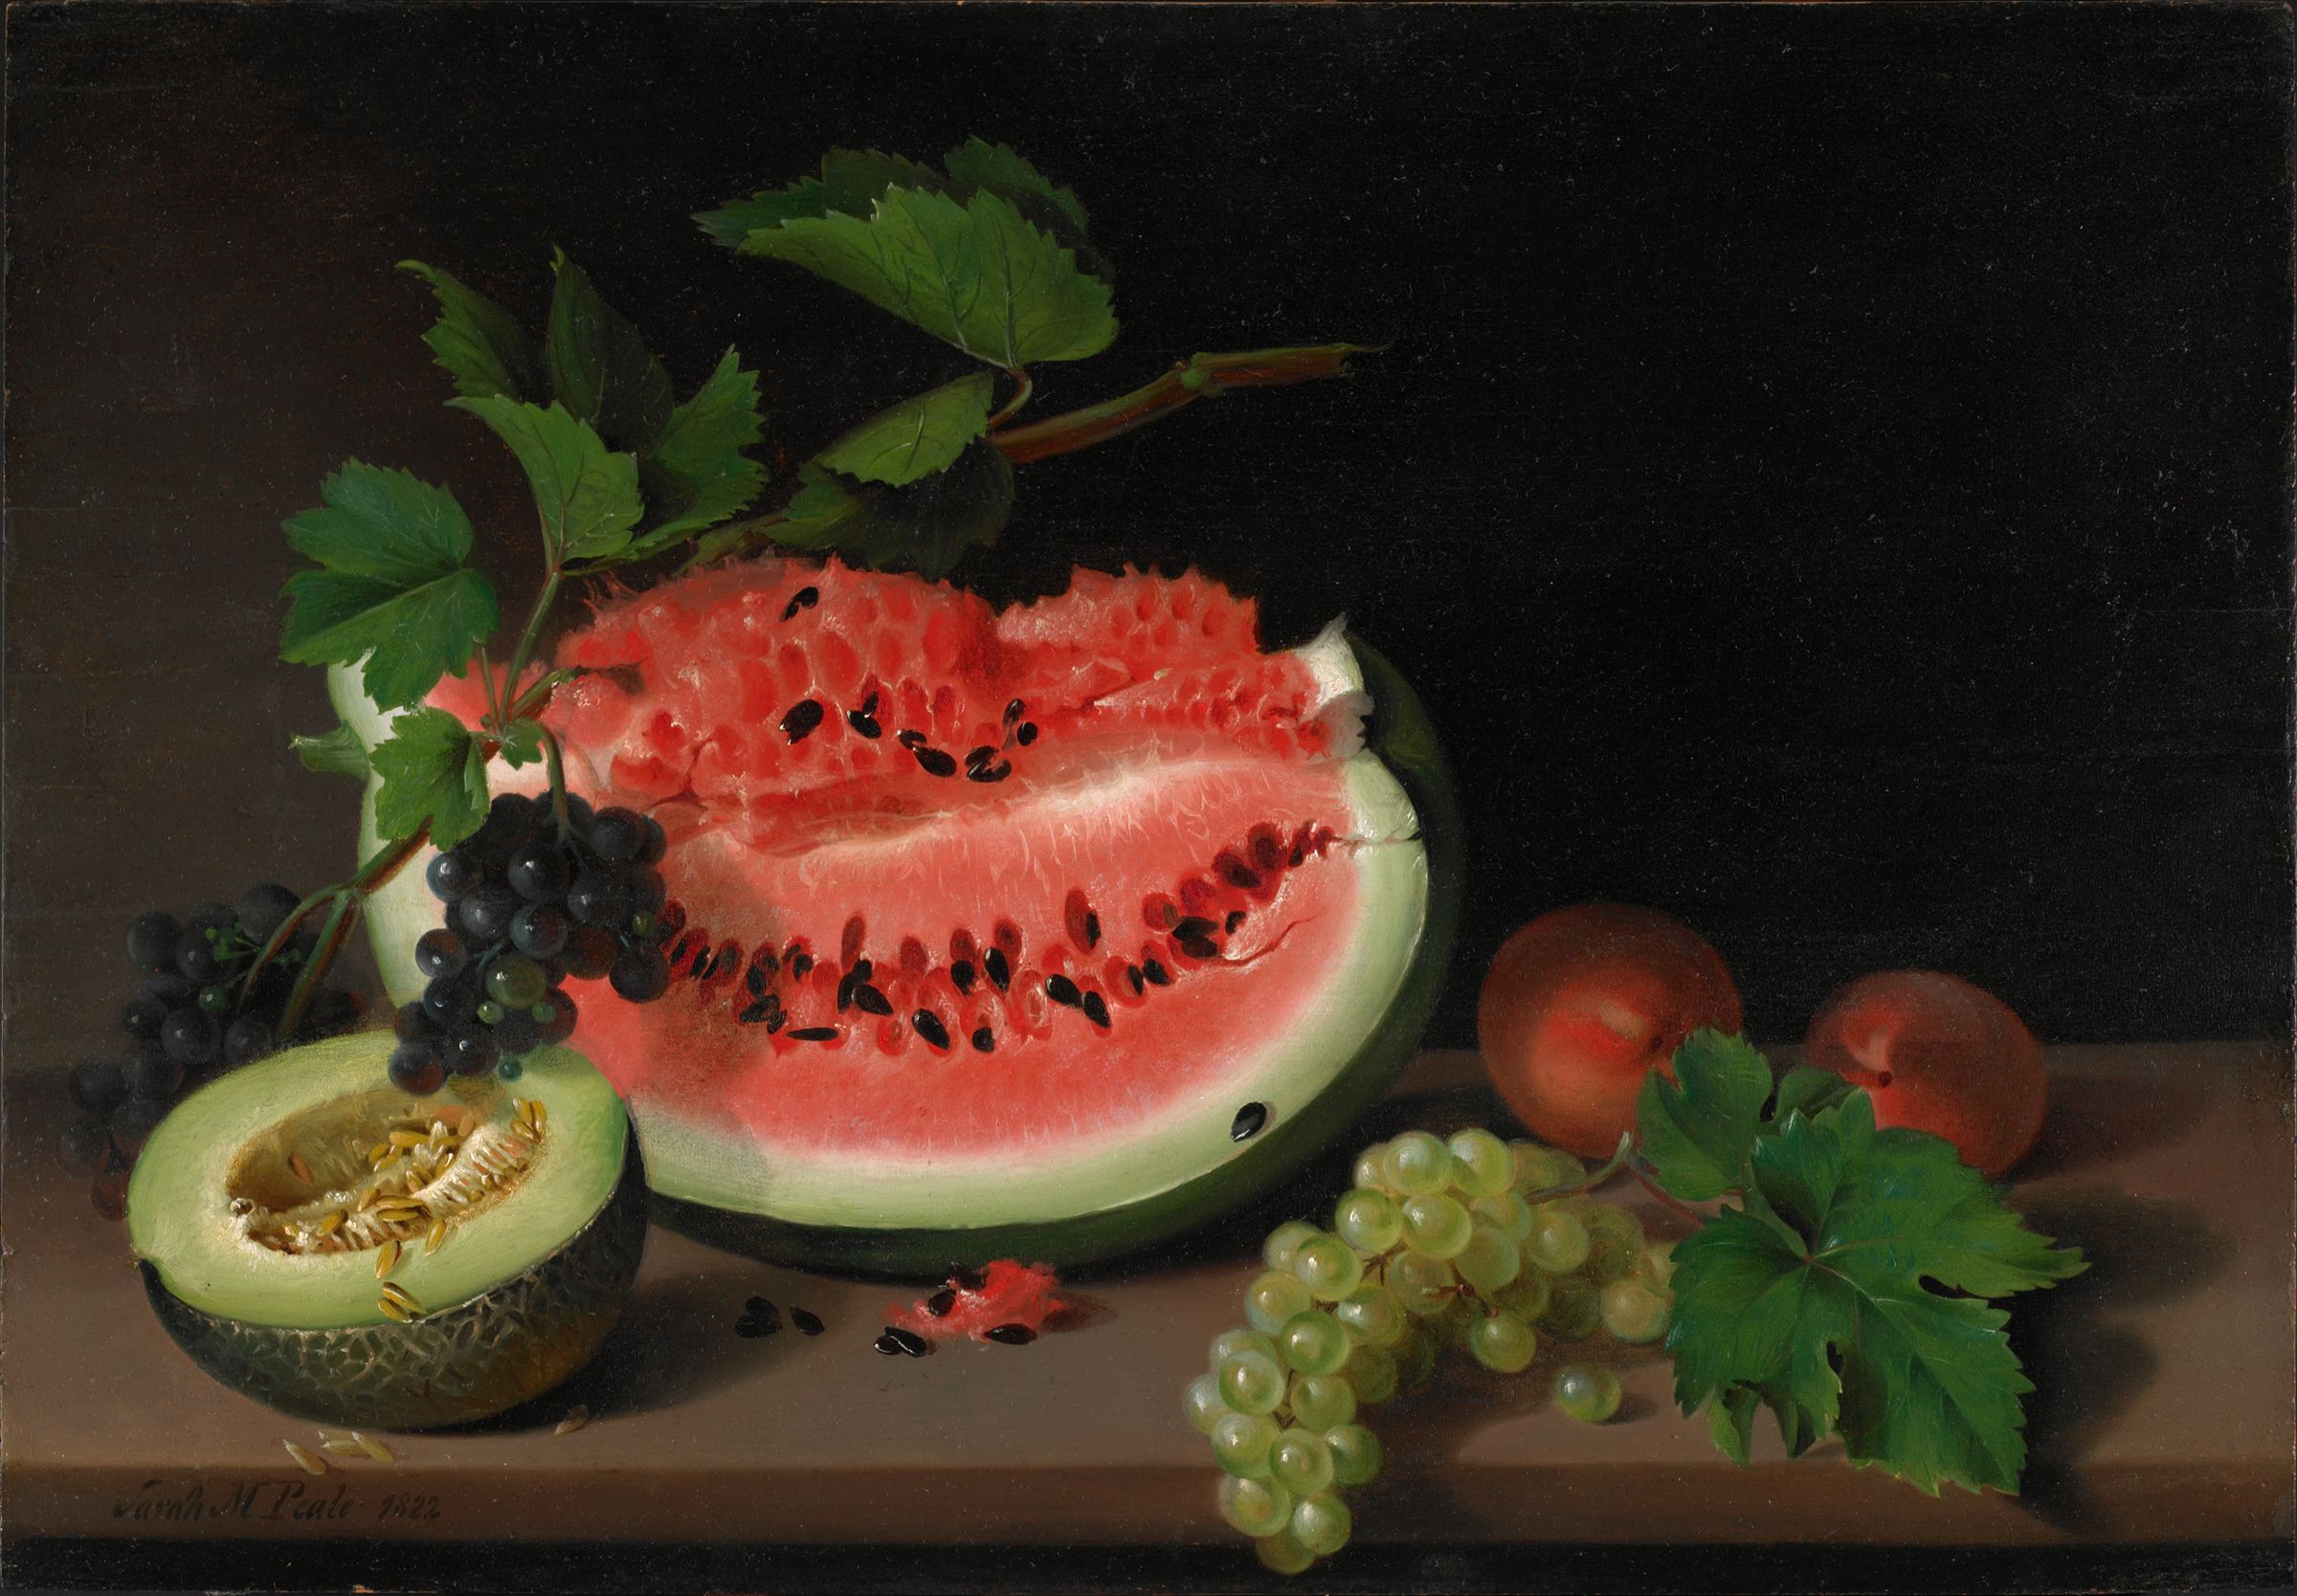 Still Life with Watermelon by Sarah Miriam Peale - 1822 - 46.4 x 67 cm Harvard Art Museums